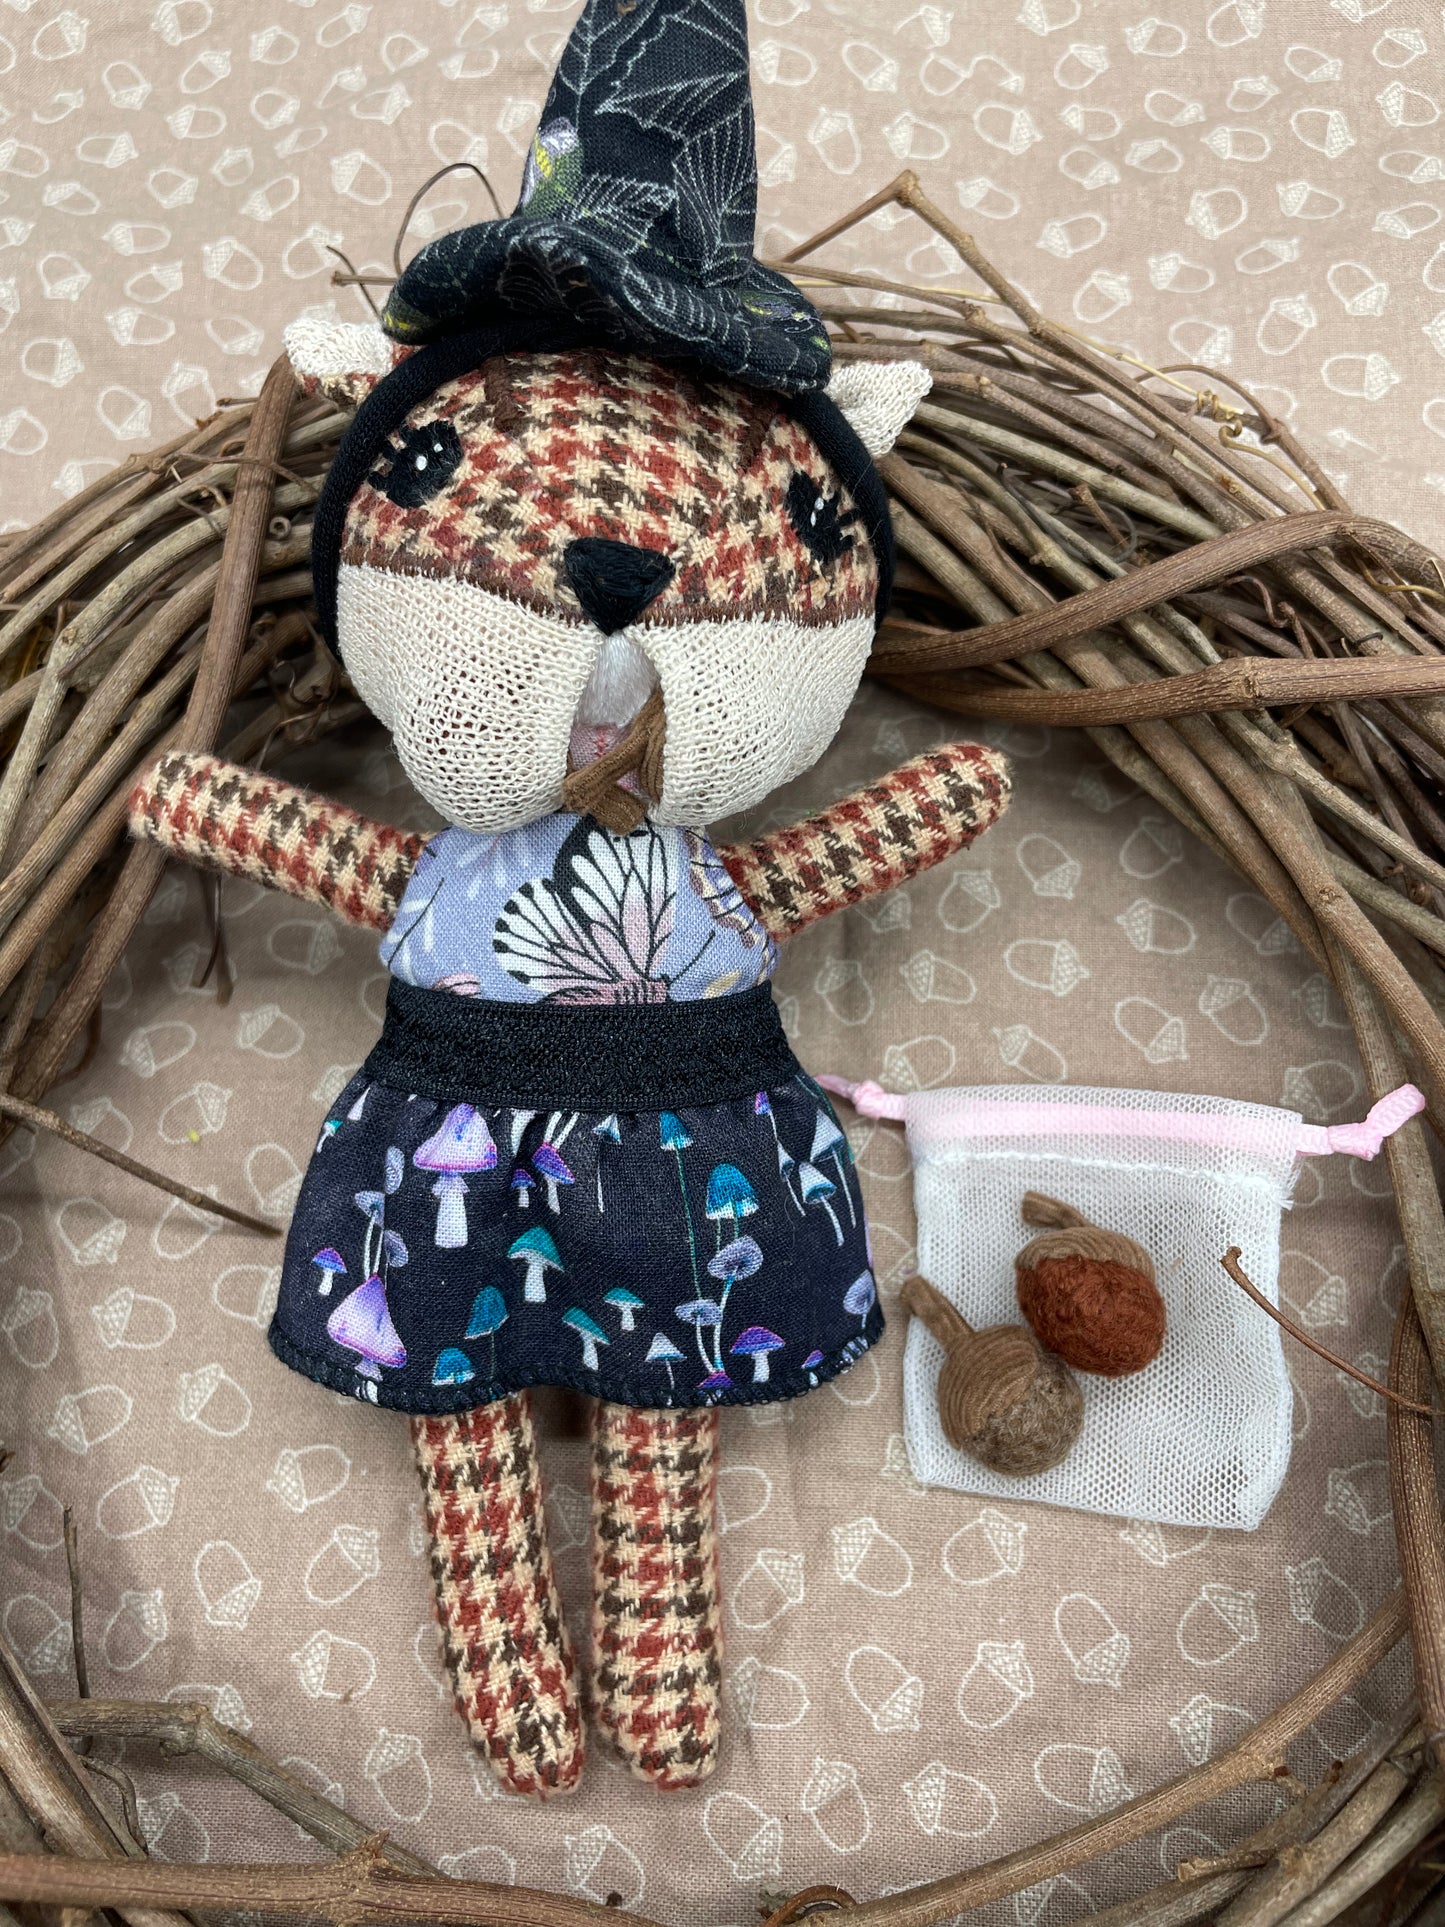 Handmade Chipmunk Doll, Stuffed chipmunk, Reversible clothes, gift idea, gift for kids, Witch doll, witch, gift, plaid, cute doll